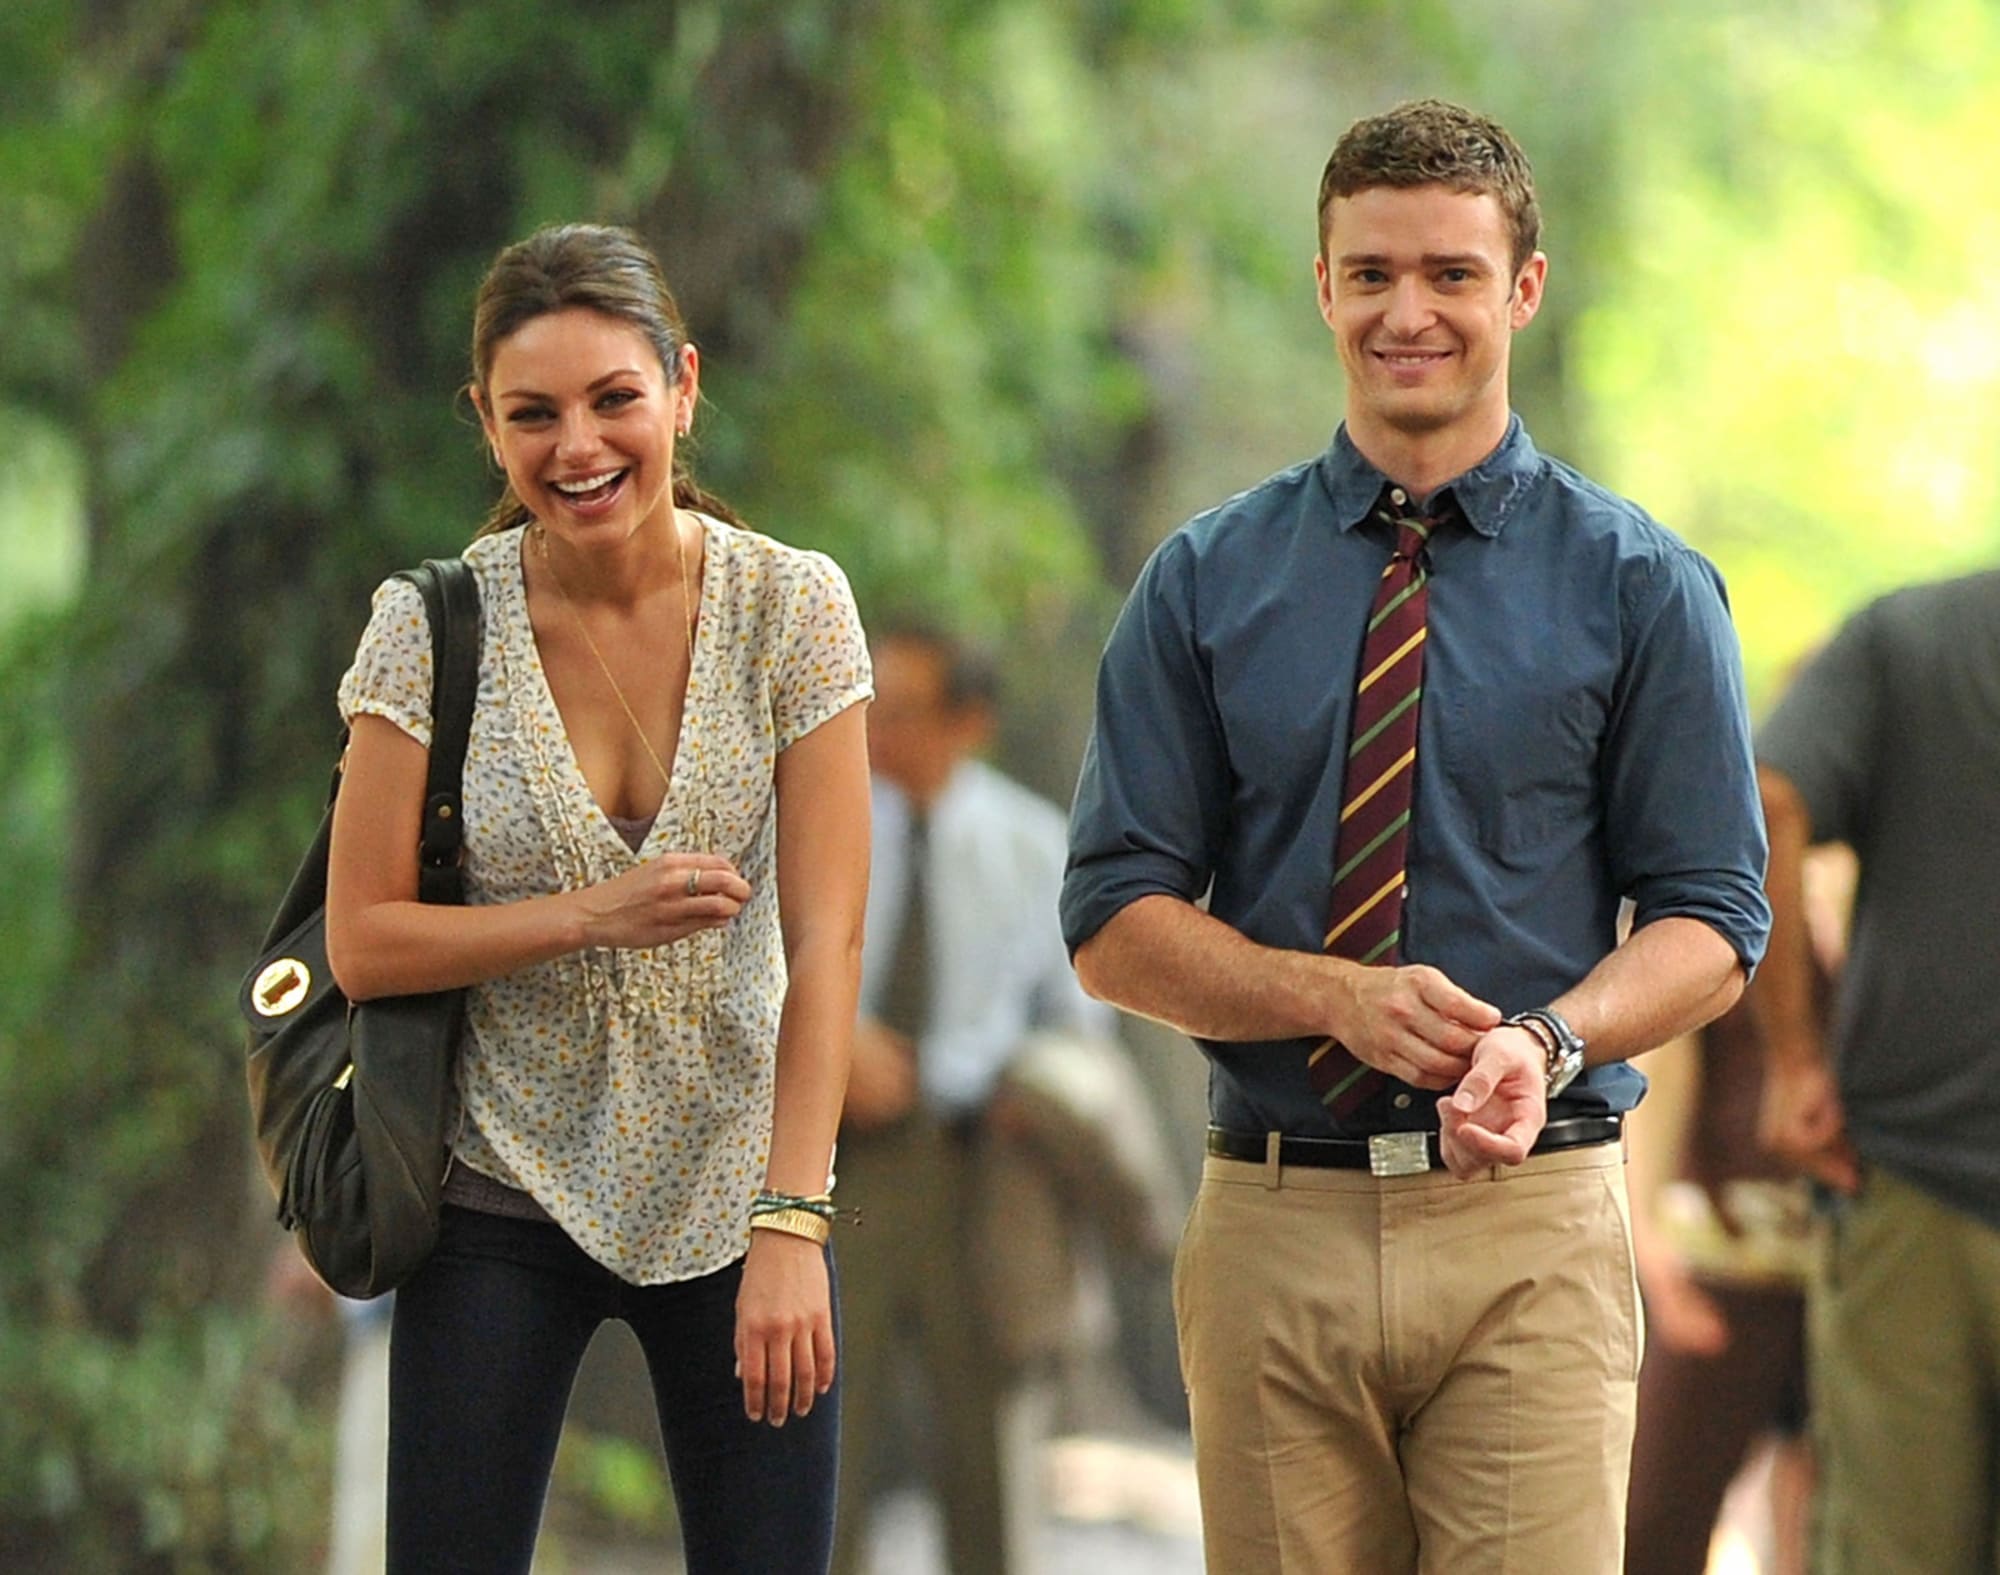 How Old Were Mila Kunis And Justin Timberlake In Friends With Benefits